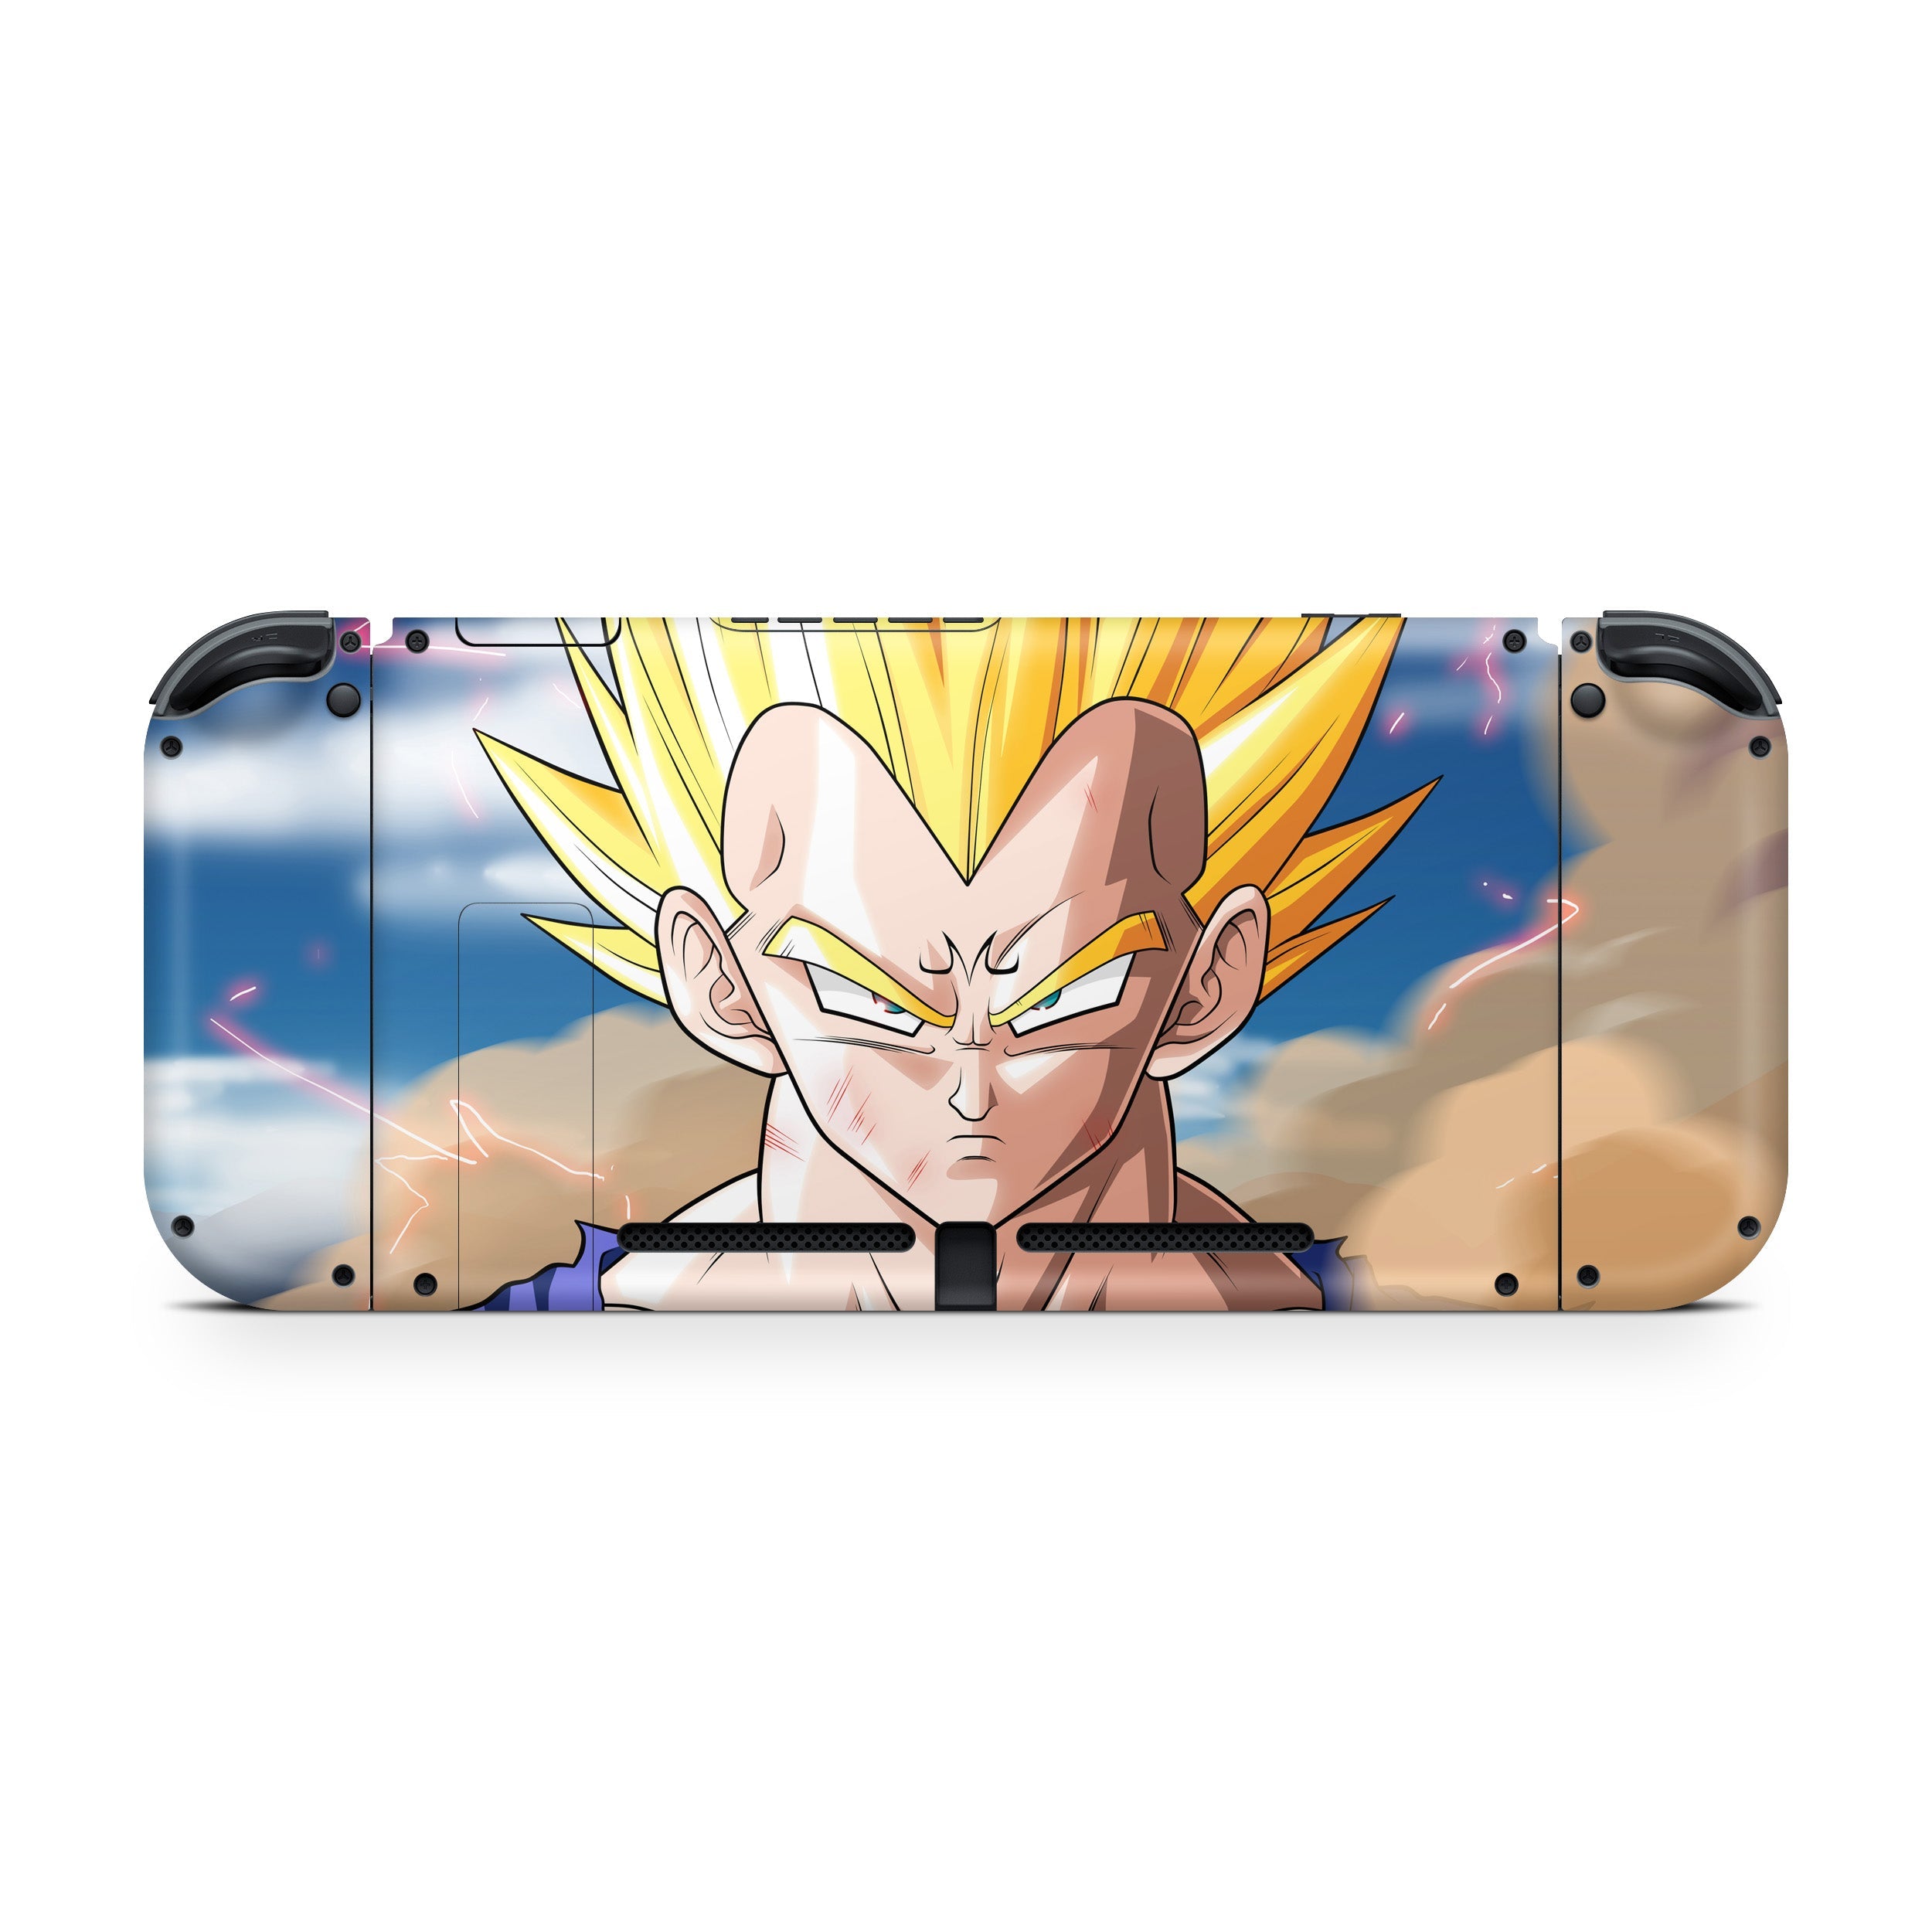 A video game skin featuring a Dragon Ball Z Vegeta design for the Nintendo Switch.